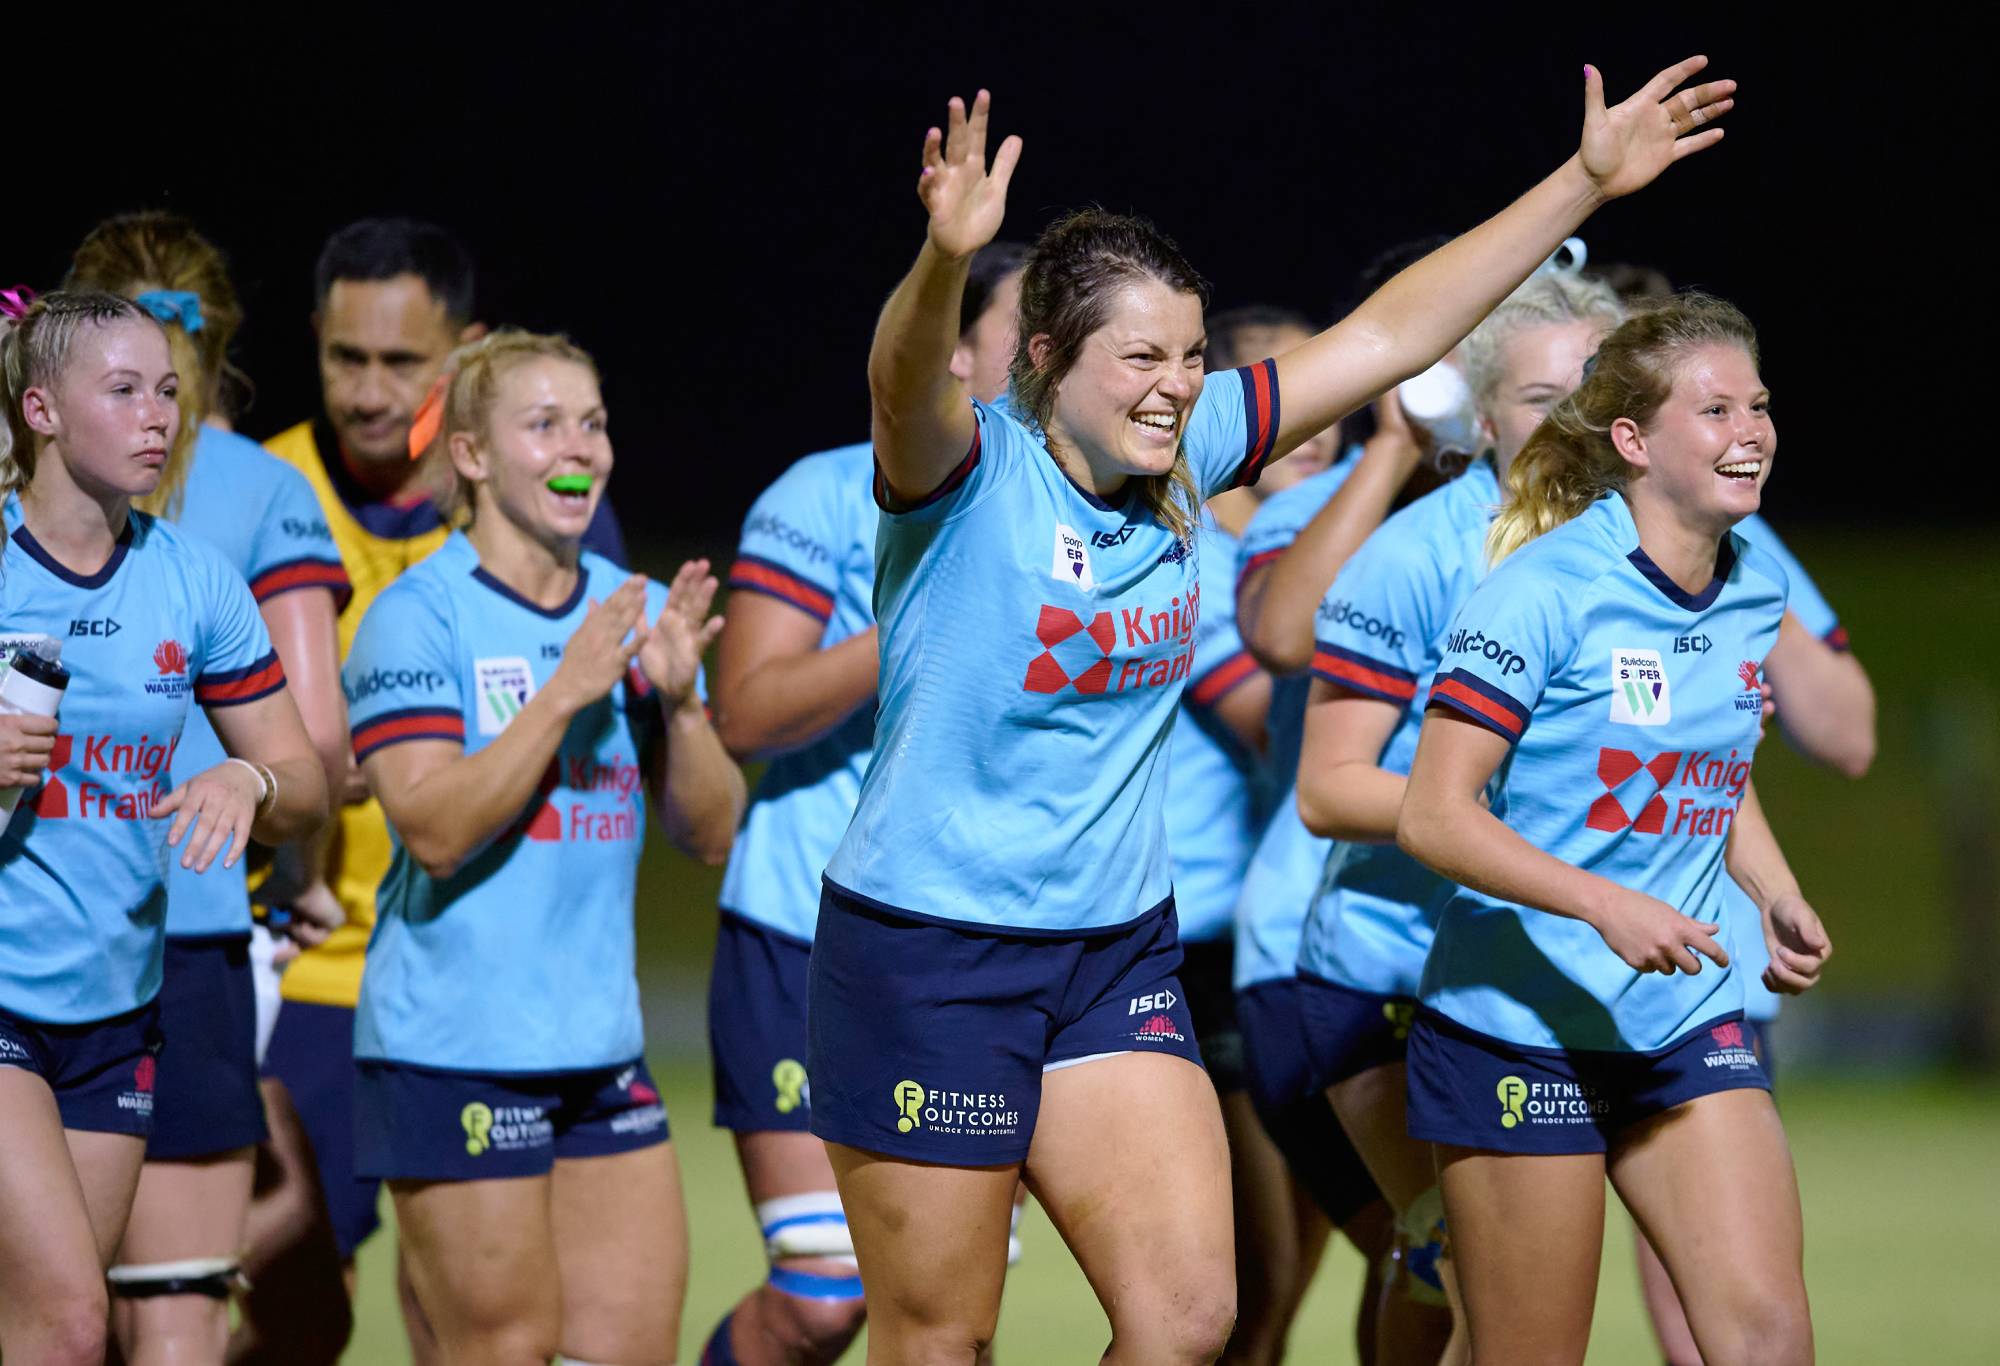 Grace Hamilton of the Waratahs celebrates victory with team mates during the Super W Semi Final match between the NSW Waratahs and the Queensland Reds at Eric Tweedale Stadium on April 14, 2022 in Sydney, Australia. (Photo by Brett Hemmings/Getty Images)